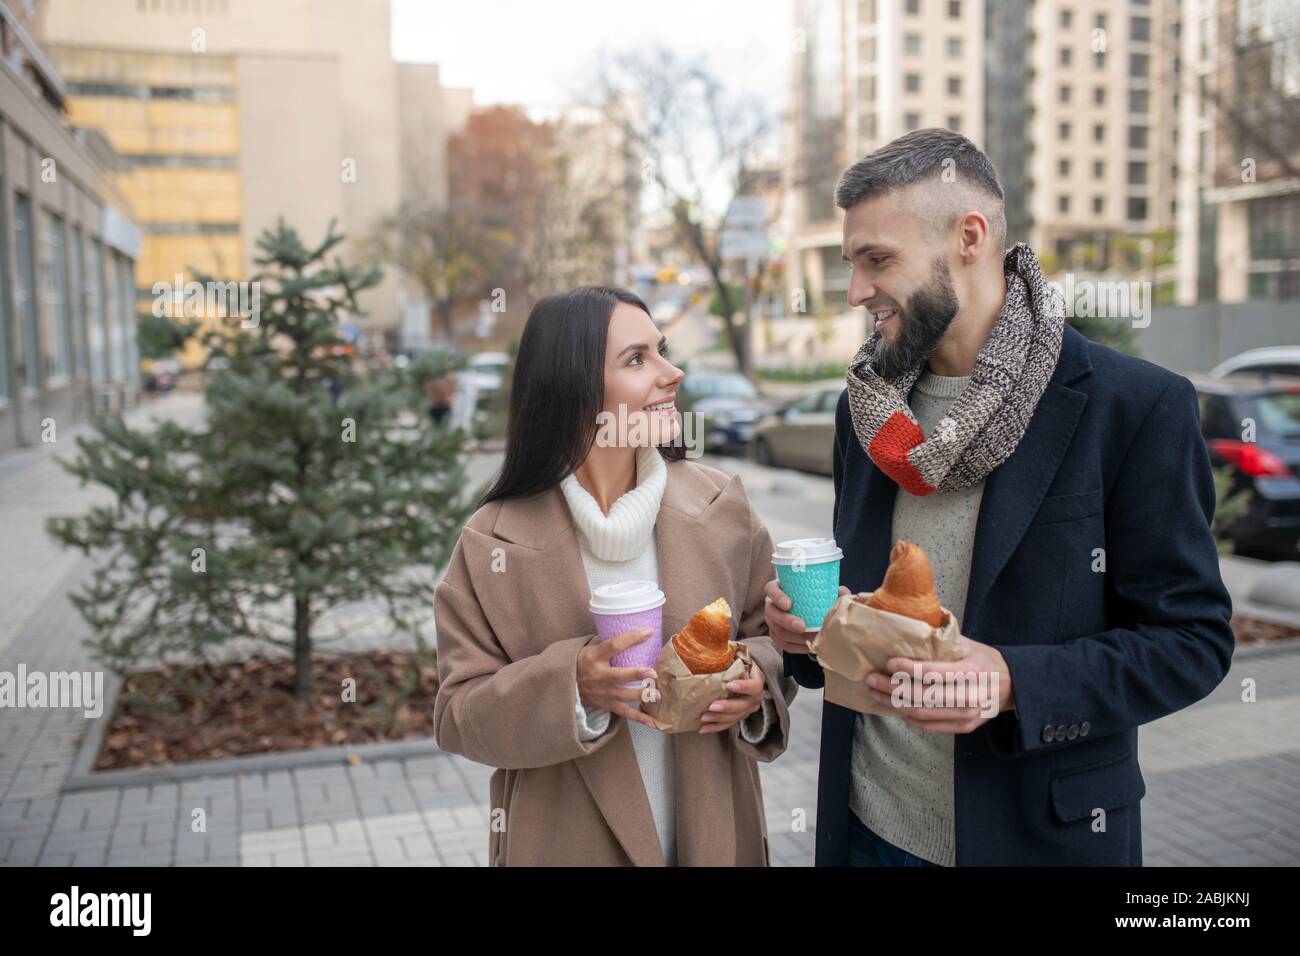 Delighted young couple having a snack together Stock Photo